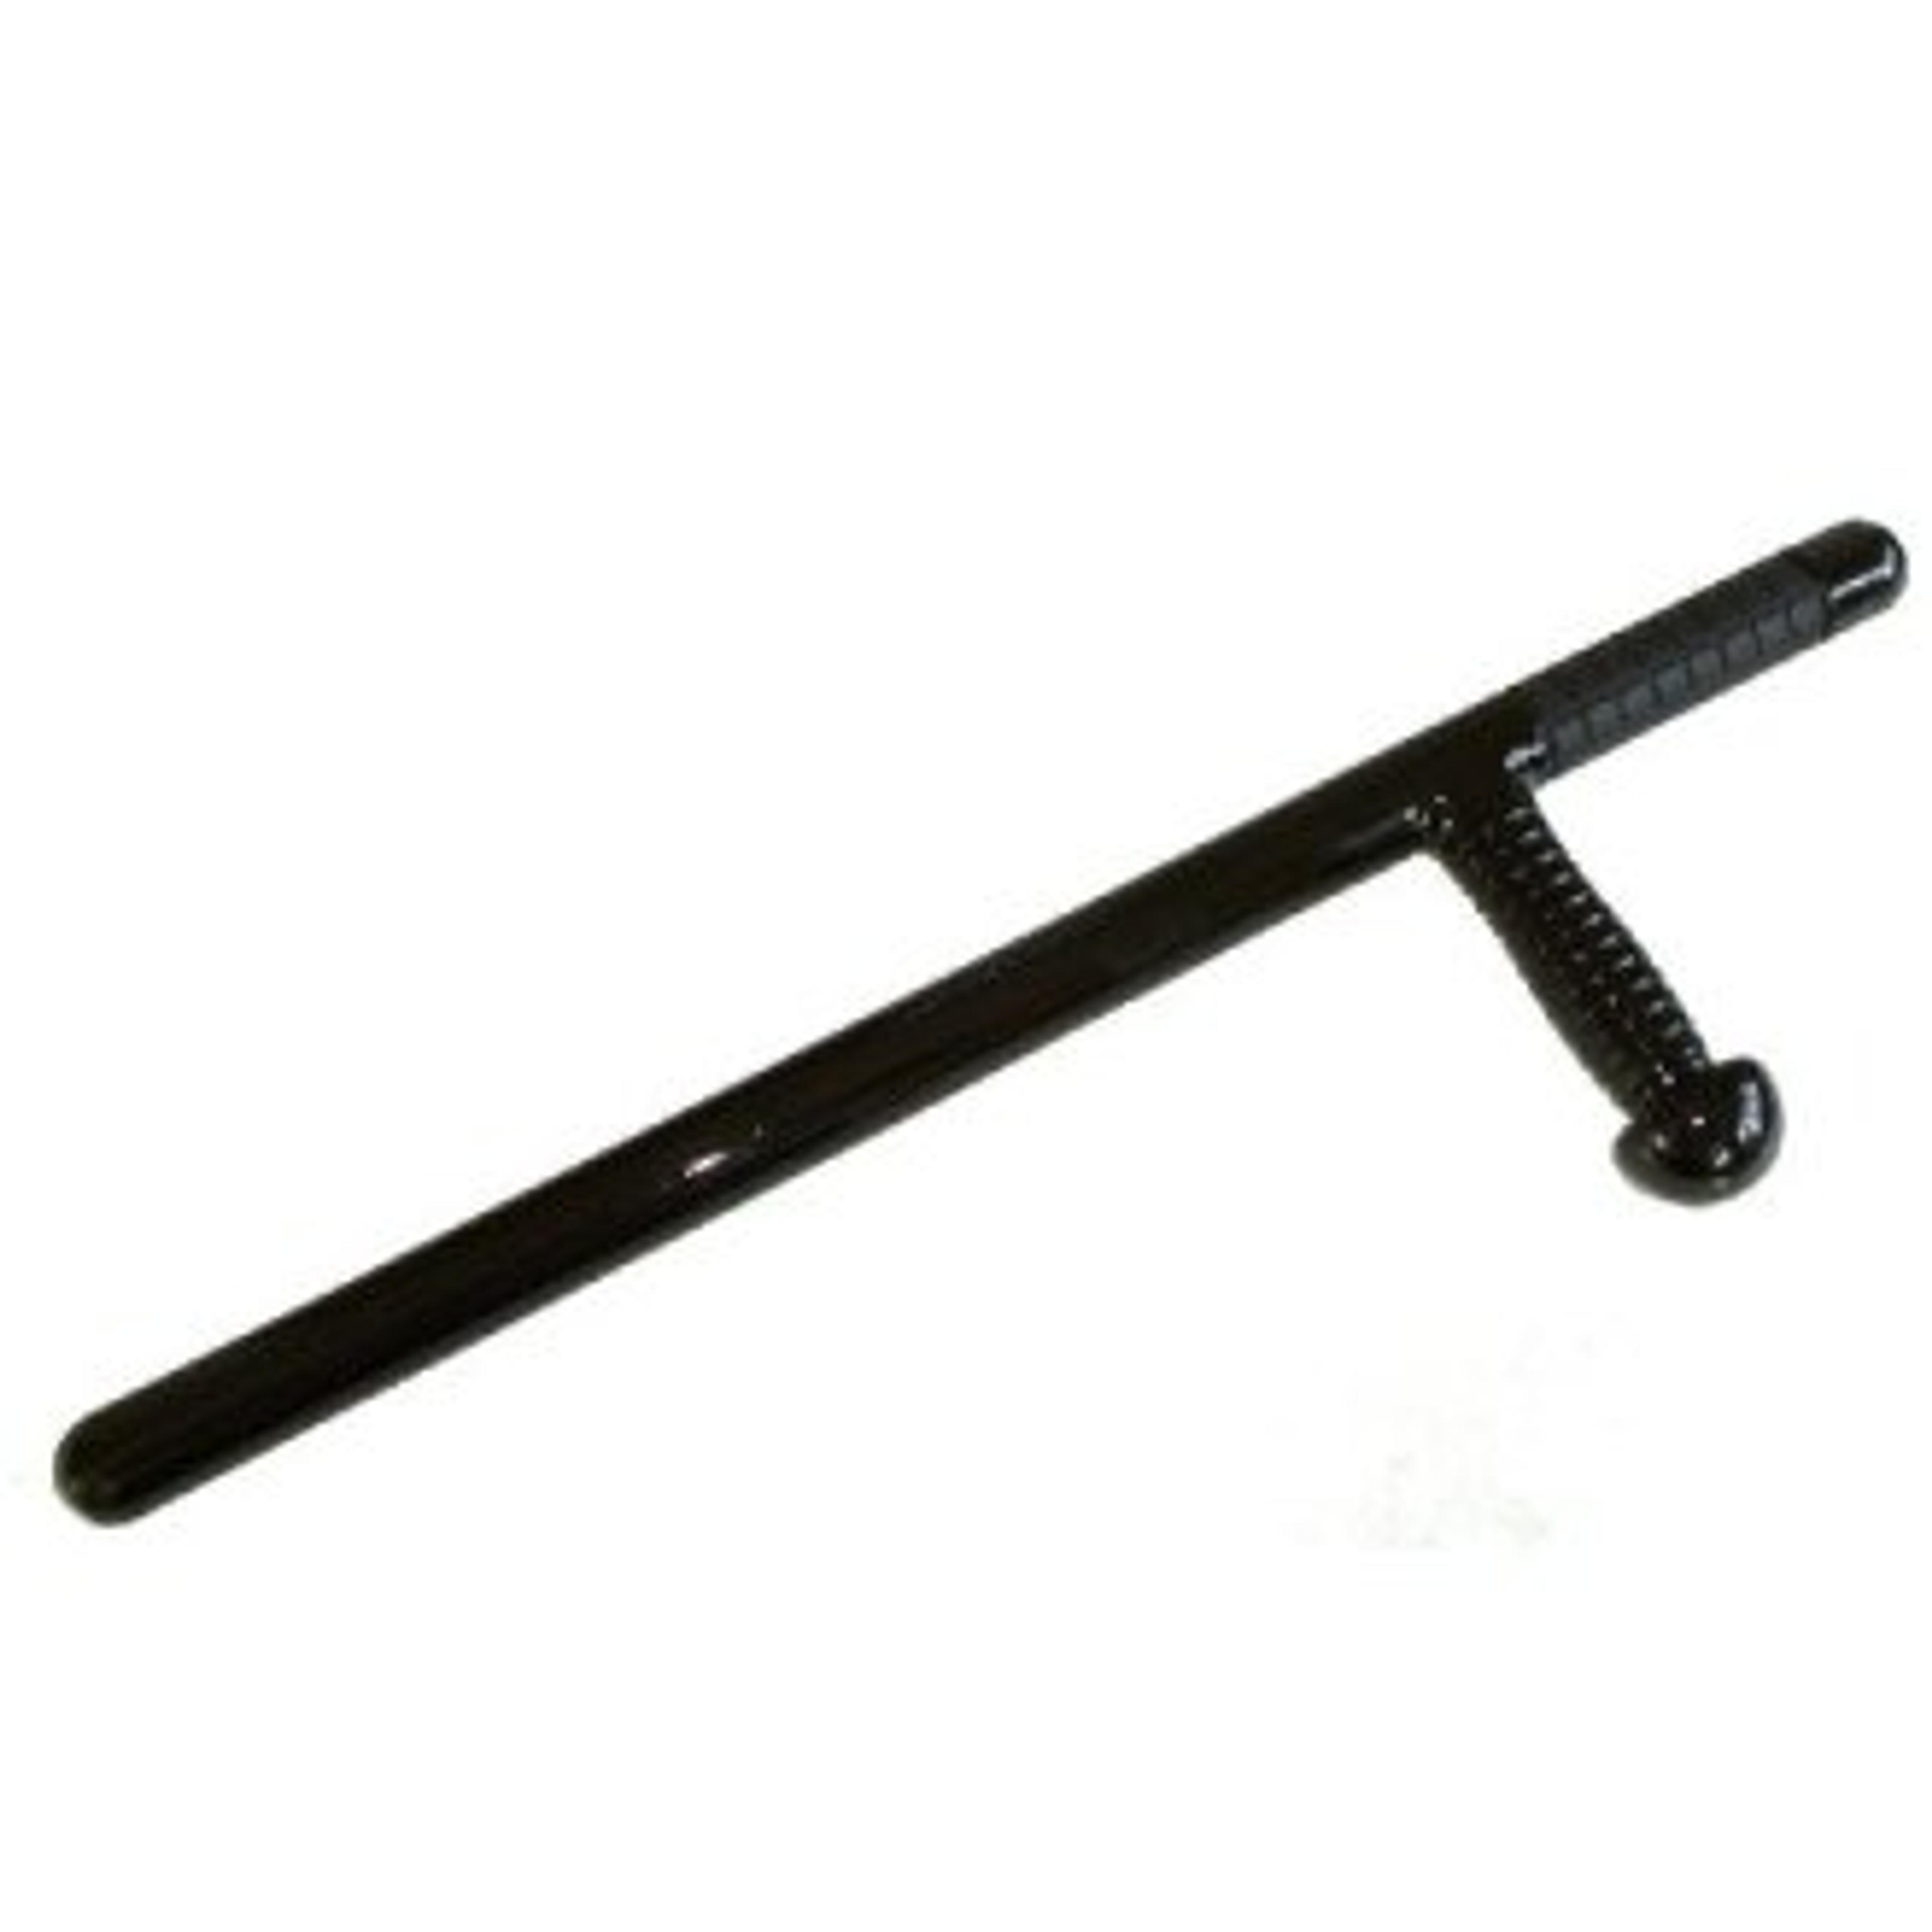 Military/ Police Nylon Fibre Tonfa - £29.99 : Playwell Martial Arts, The UK’s Largest Online Martial Arts Superstore | Est 1995